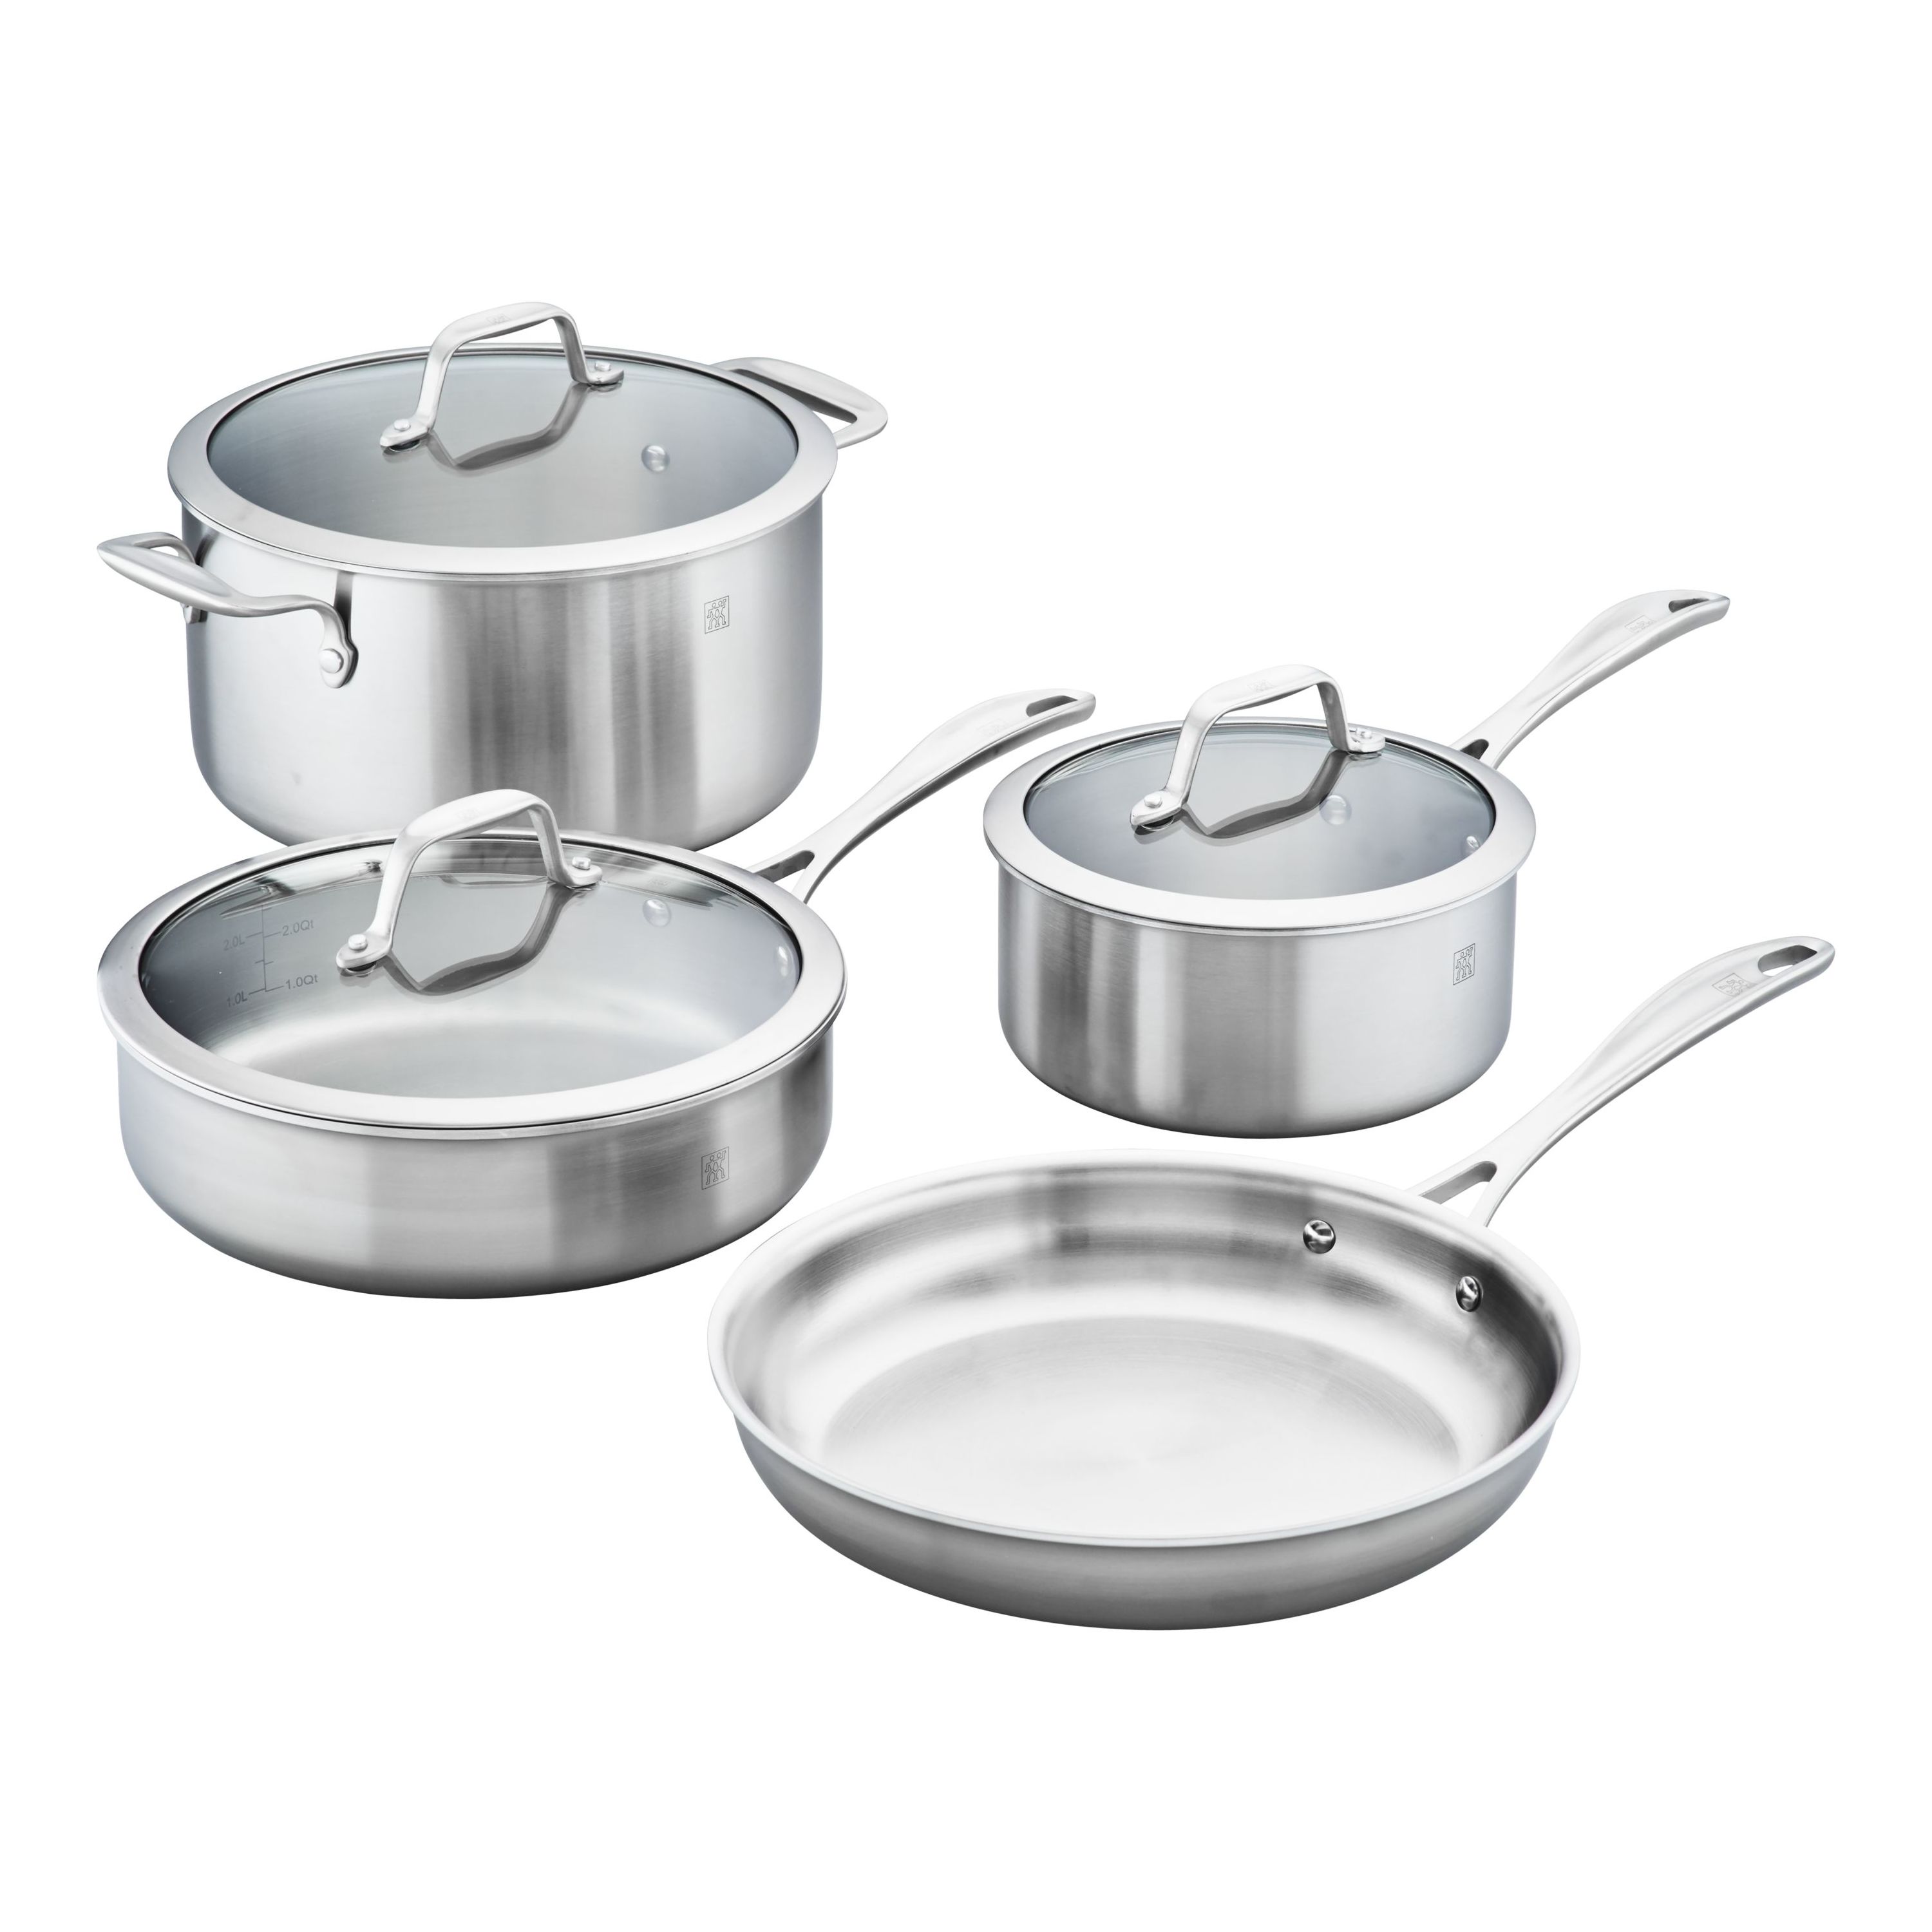 Zwilling Spirit 3-Ply Stainless Steel Cookware Set · 12 Piece Set